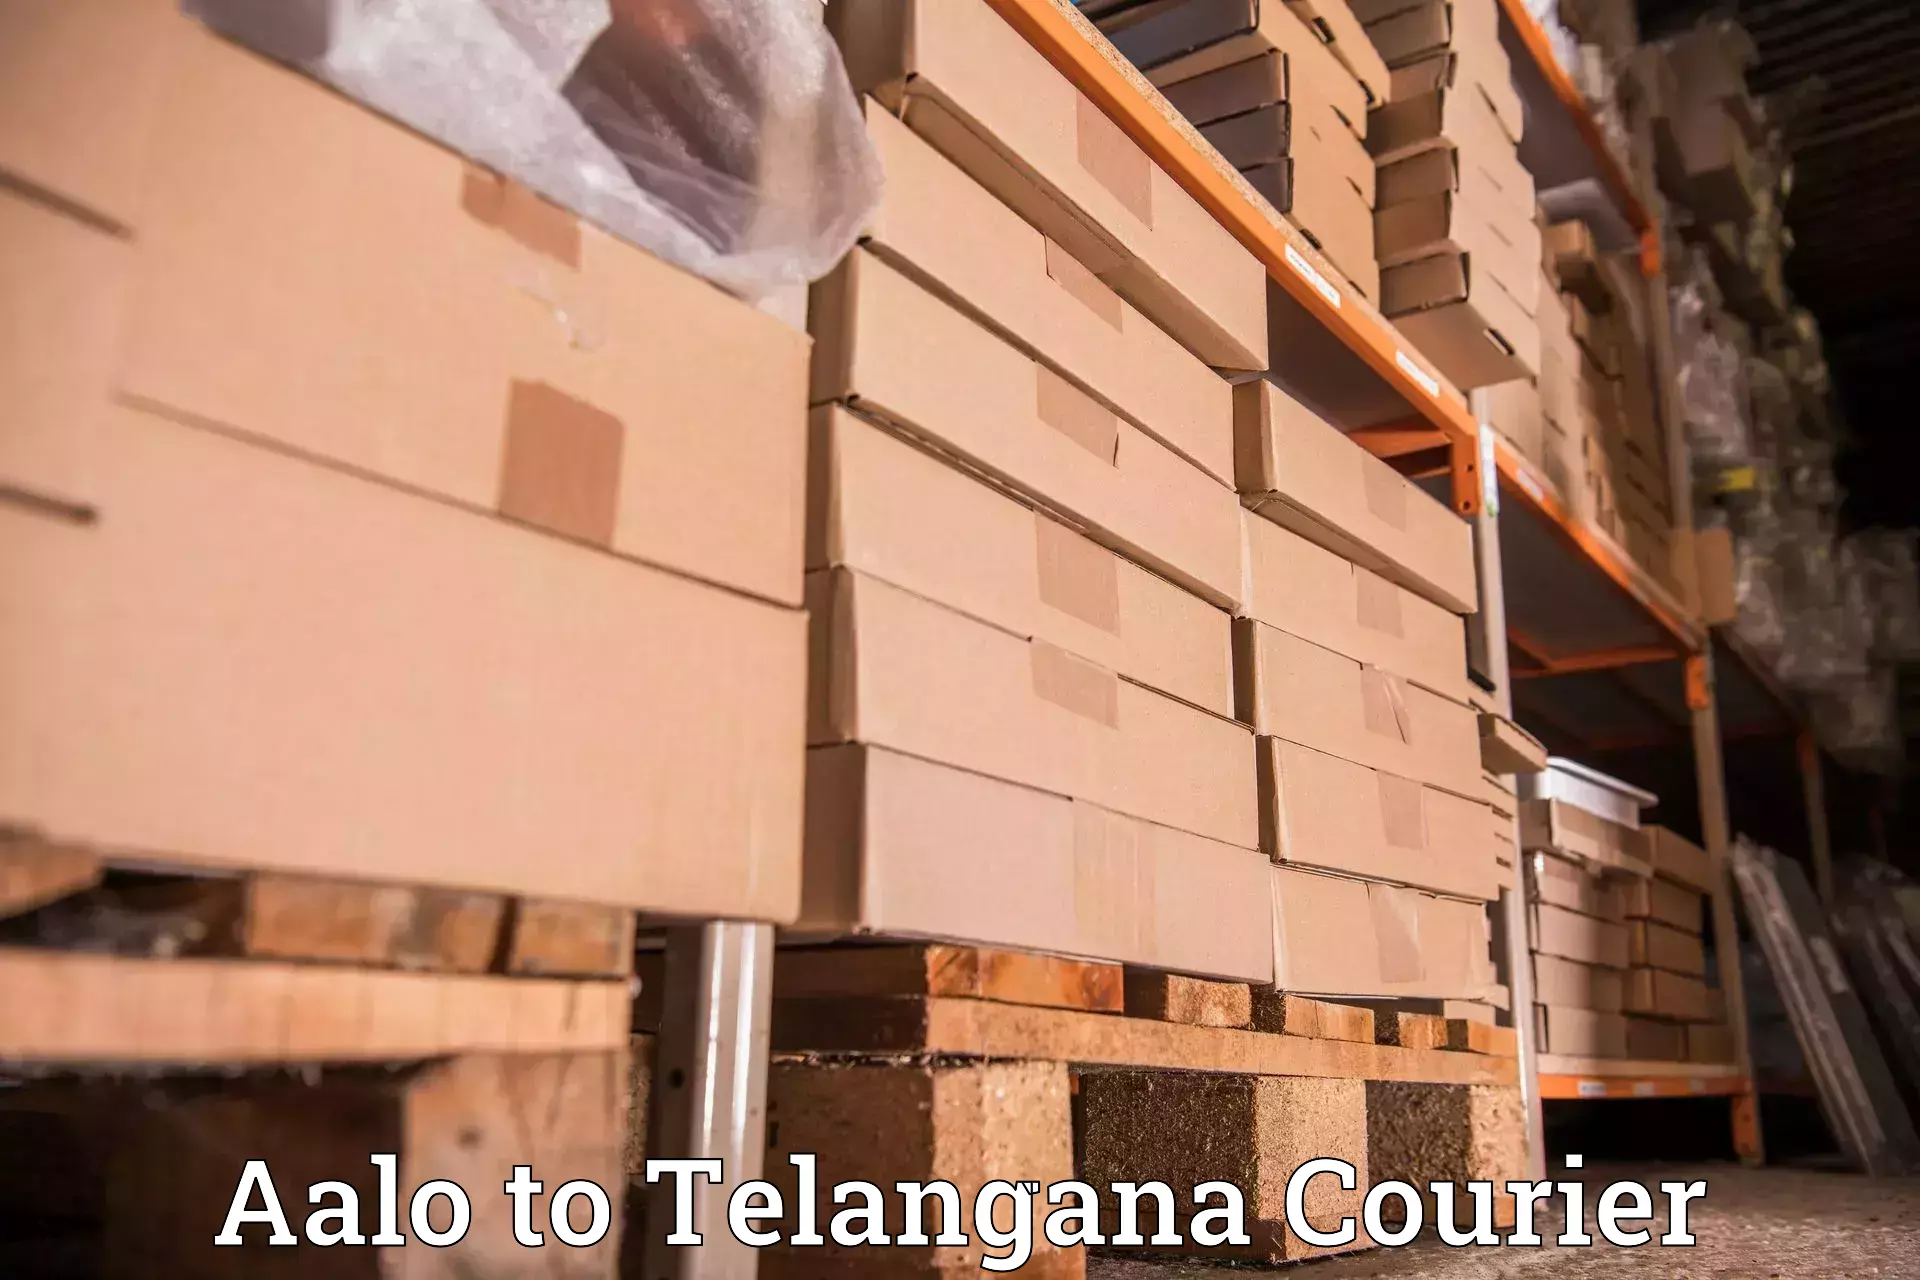 Courier service efficiency Aalo to Mahabubabad